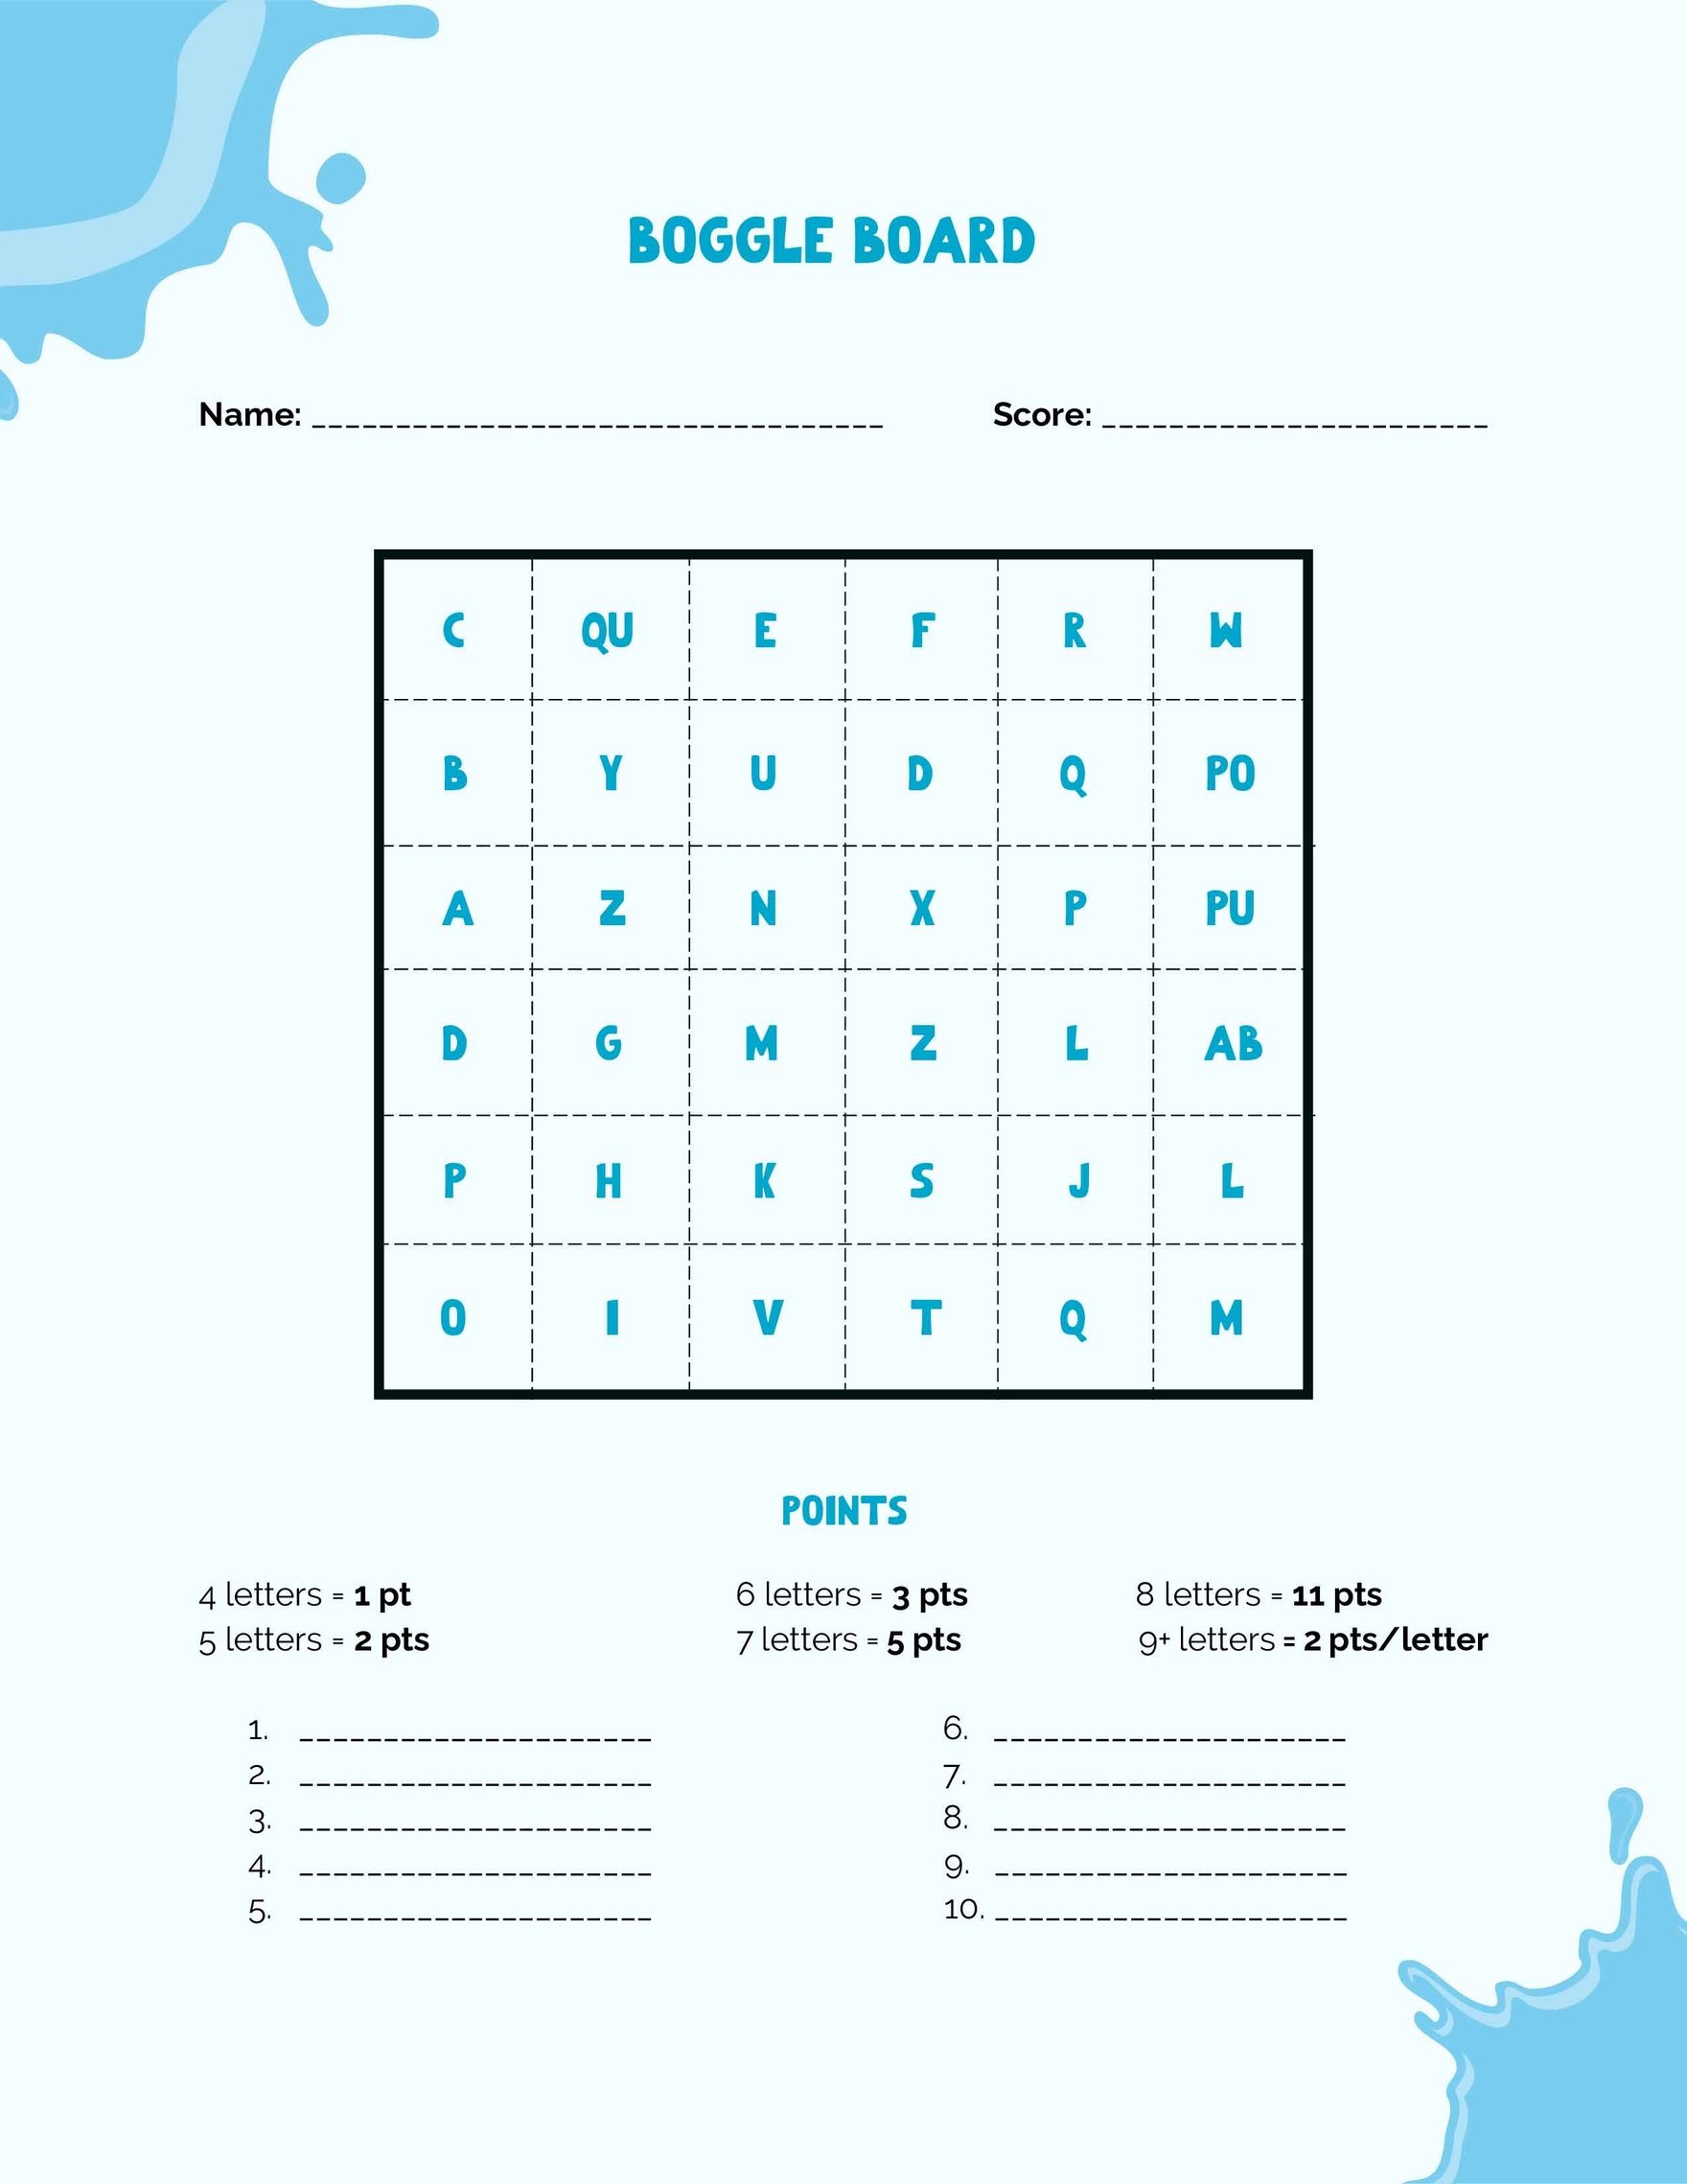 boggle-board-pages-templates-design-free-download-template